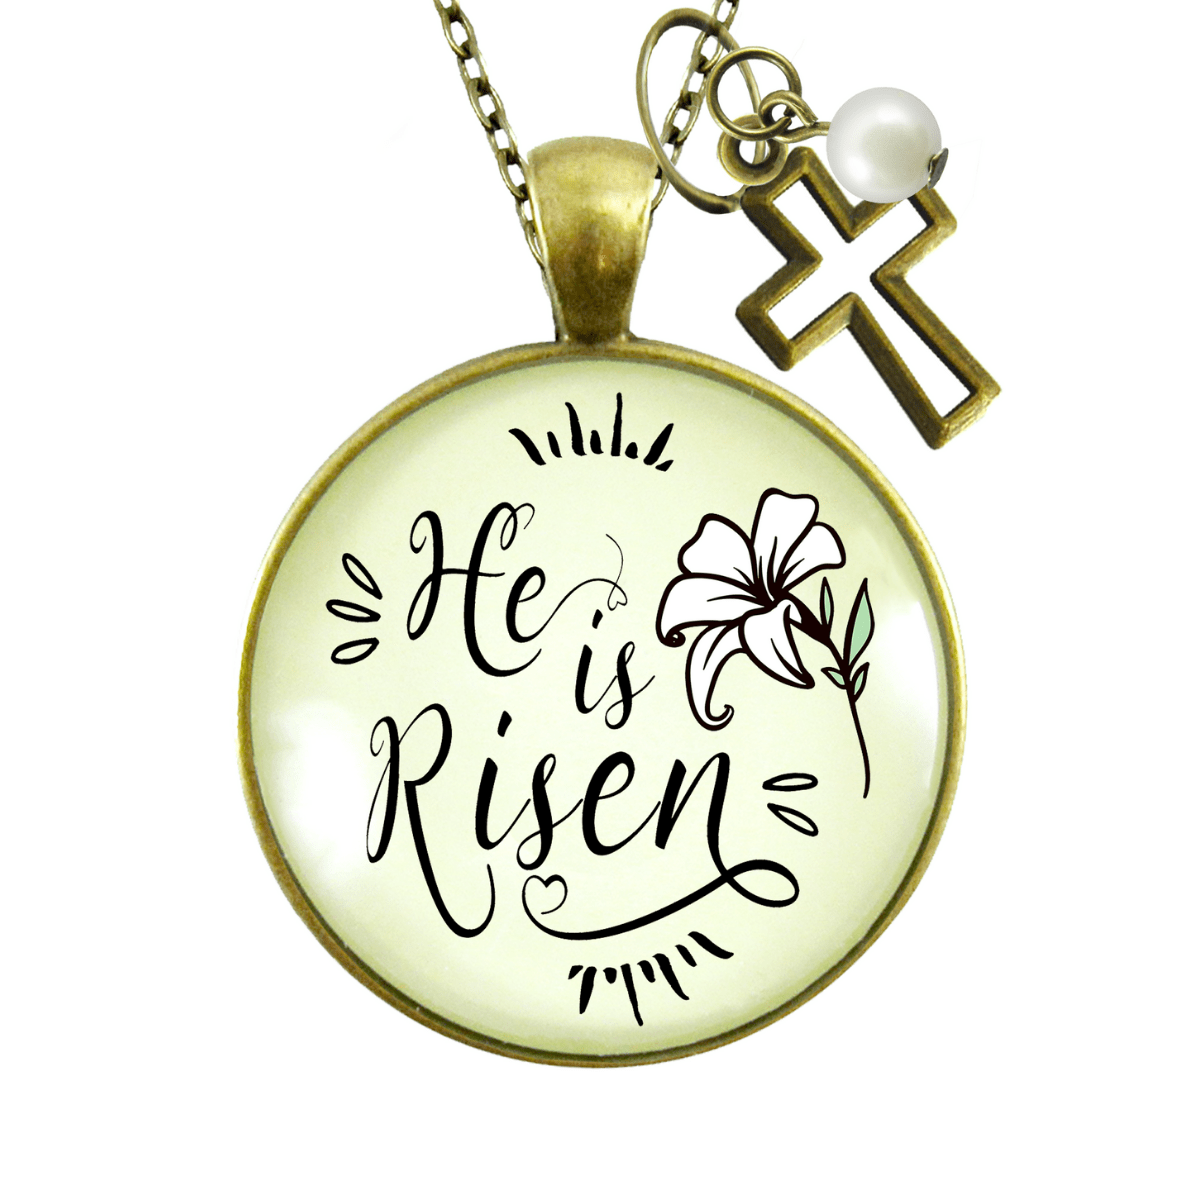 Gutsy Goodness Faith Necklace He is Risen! Christian Lily Jewelry Cross Charm - Gutsy Goodness Handmade Jewelry;Faith Necklace He Is Risen! Christian Lily Jewelry Cross Charm - Gutsy Goodness Handmade Jewelry Gifts